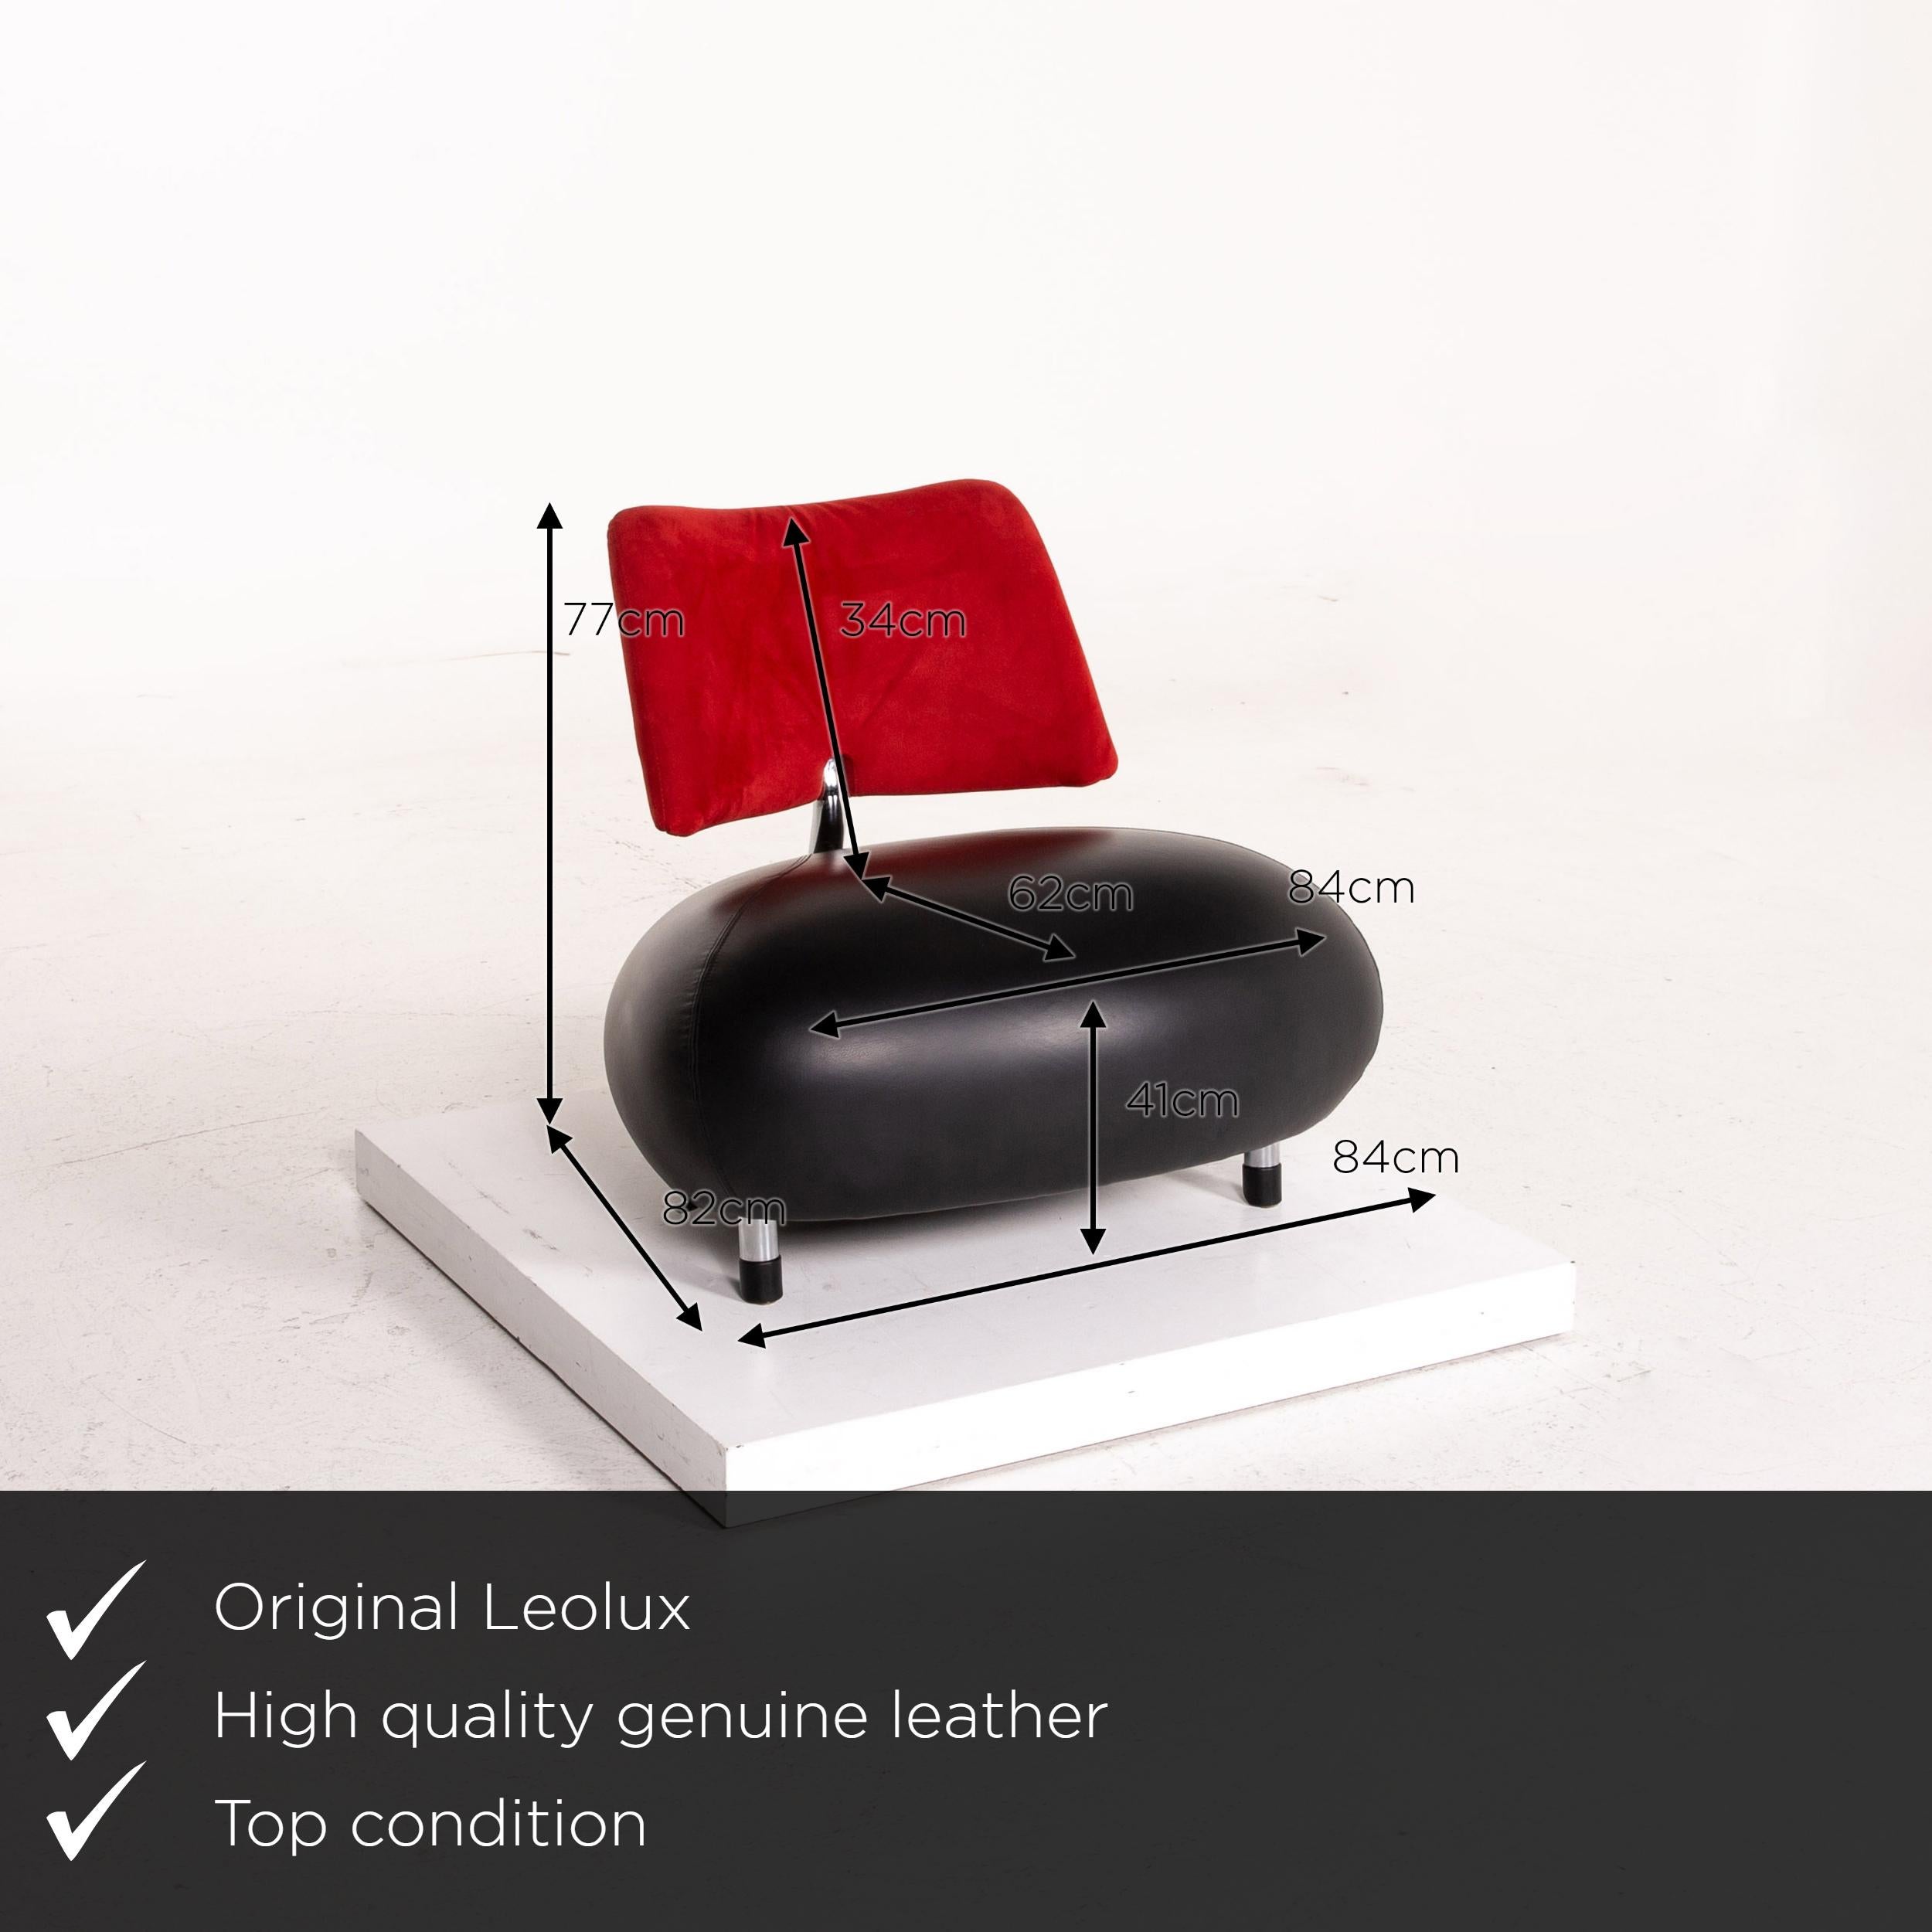 We present to you a Leolux Pallone leather Alcantara fabric armchair black red.
    
 

 Product measurements in centimeters:
 

Depth 82
Width 84
Height 77
Seat height 41
Seat depth 62
Seat width 84
Back height 34.
     
   